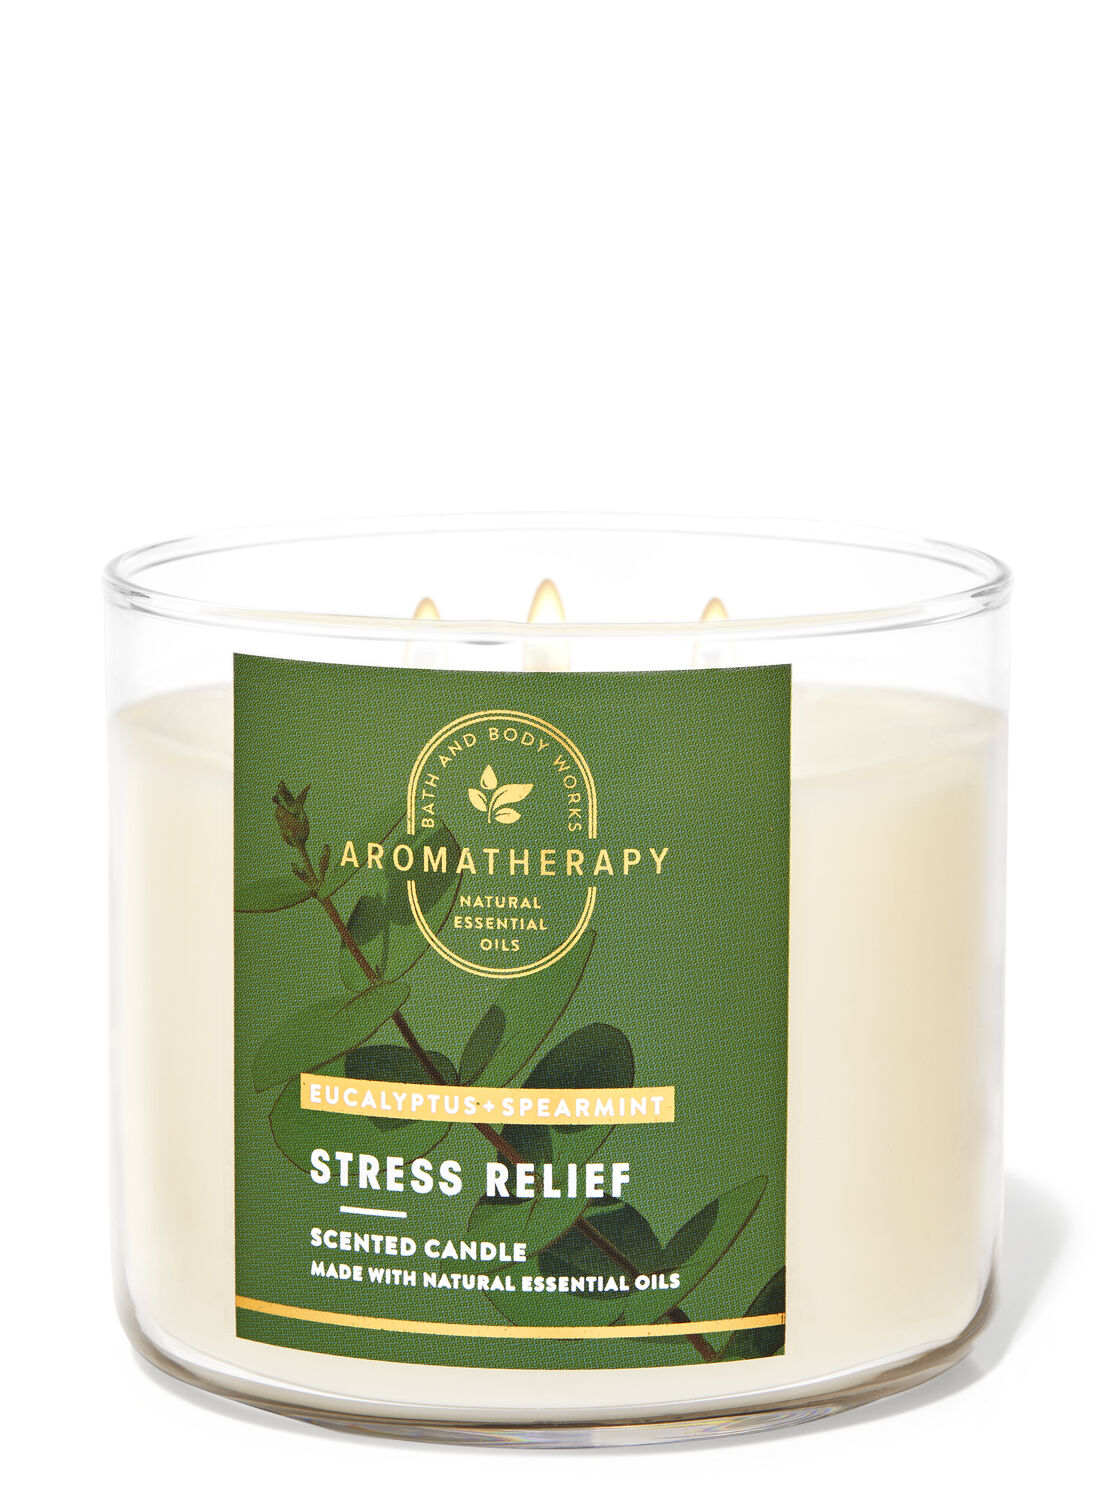 Aromatherapy Stress Relief Scented Candle